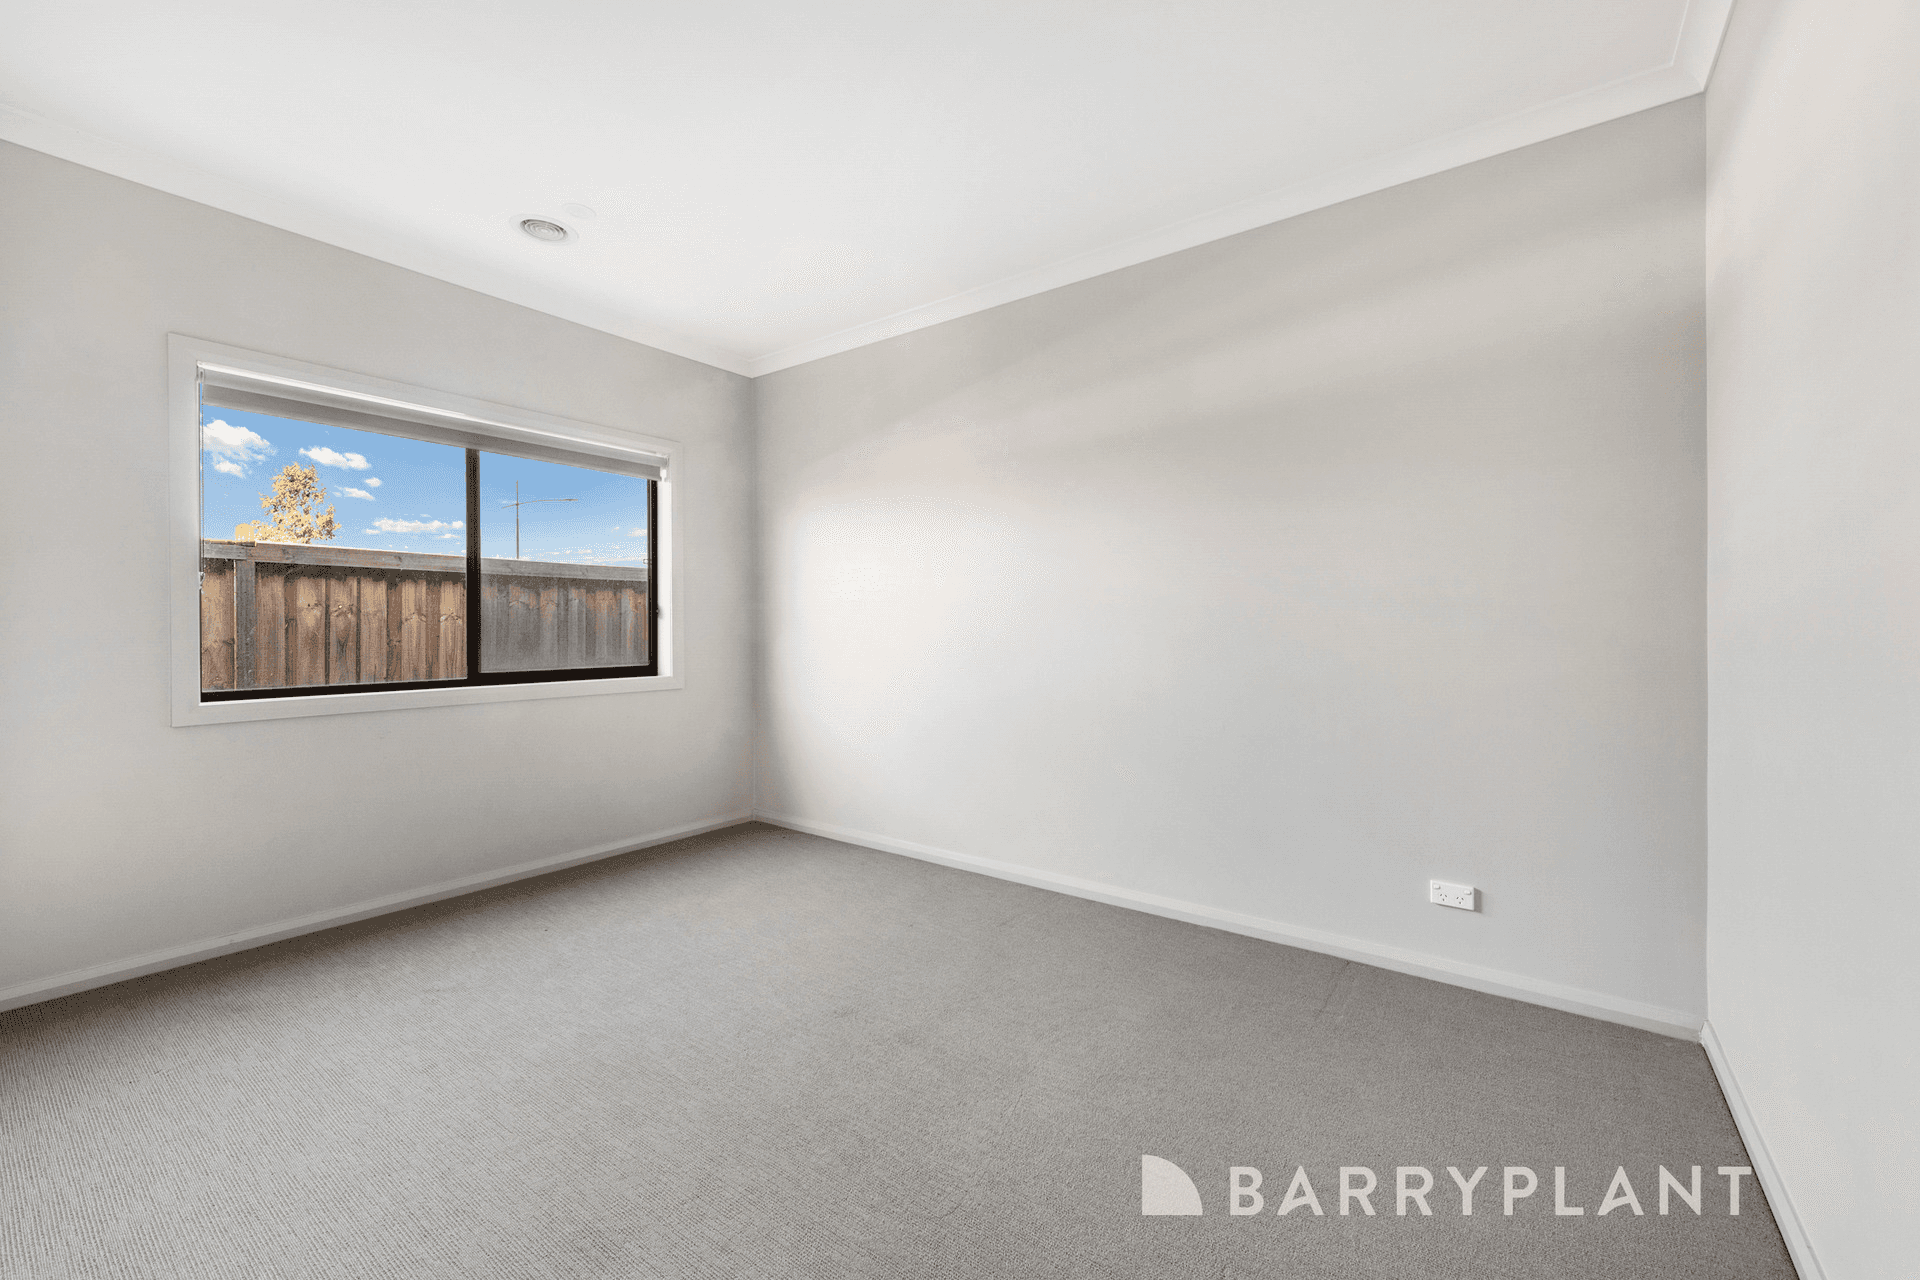 28 Murray Road, Thornhill Park, VIC 3335